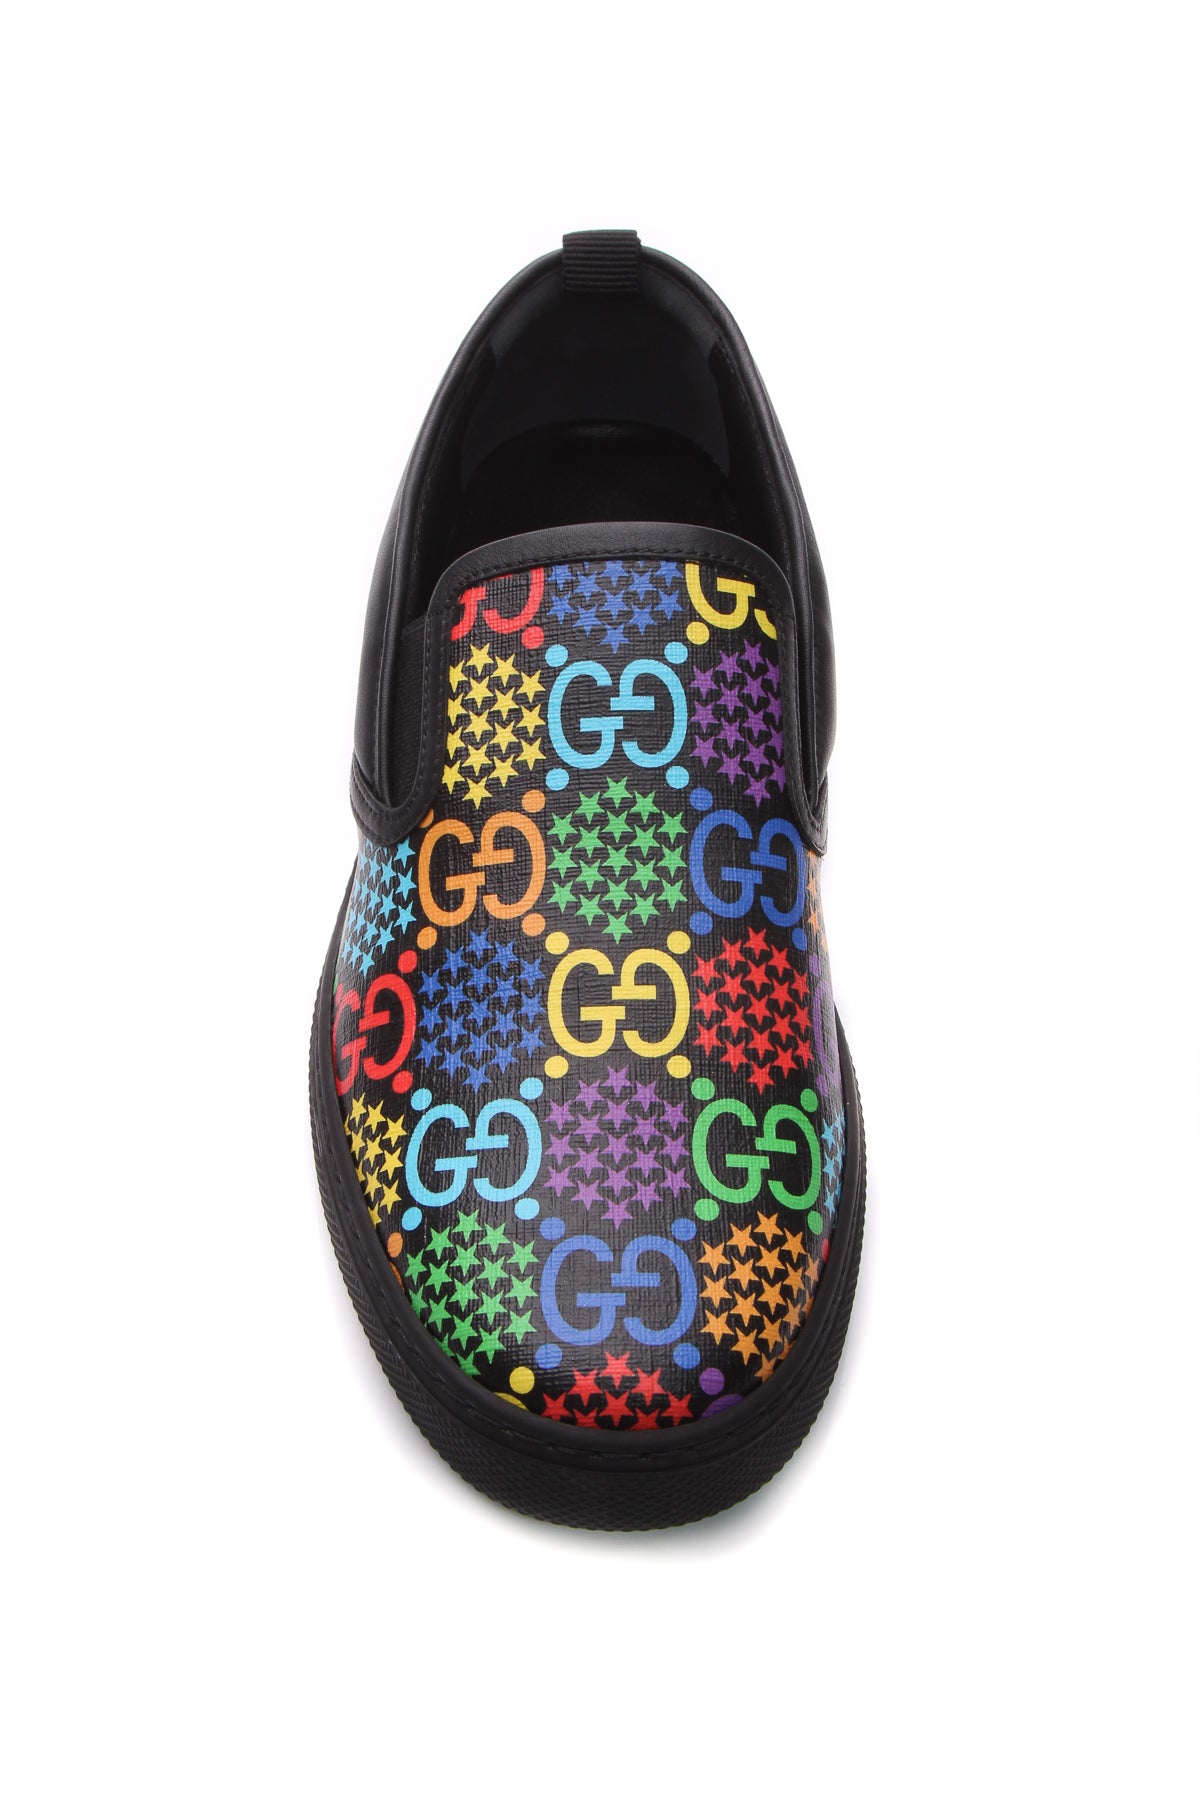 Gucci, Shoes, Limited Edition Gucci Psychedelic Slip On Sneakers